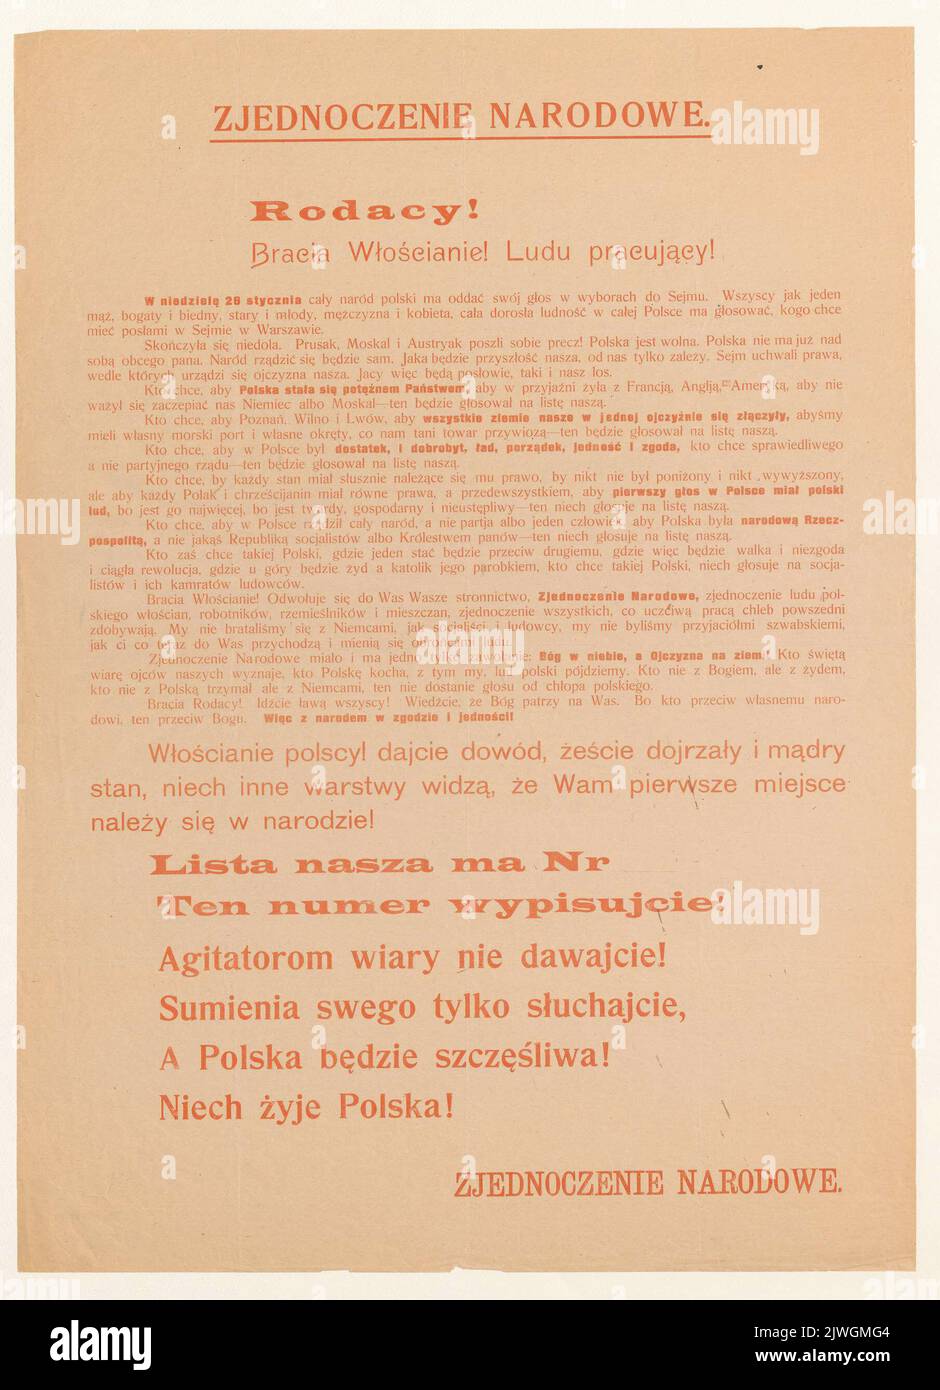 Election poster of the Zjednoczenie Narodowe [National Union] [concerns the elections to the Legislative Sejm of the Republic of Poland in 1919]. unknown, printing house Stock Photo